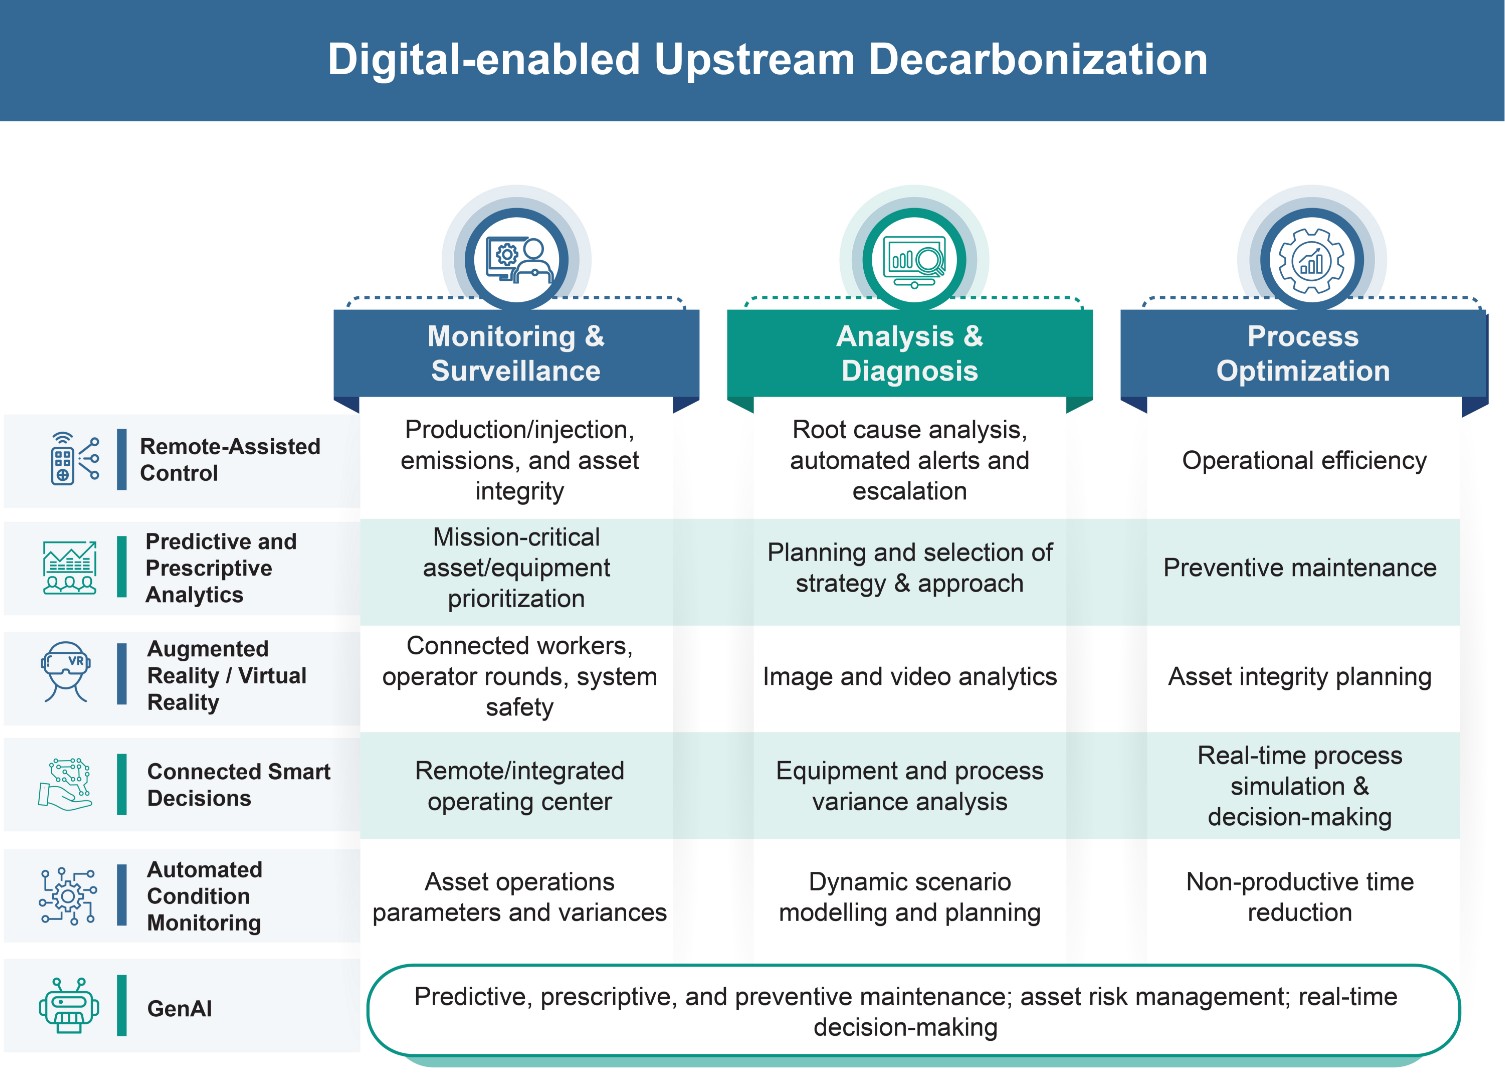 Digital-Led Upstream Decarbonization for Oil and Gas